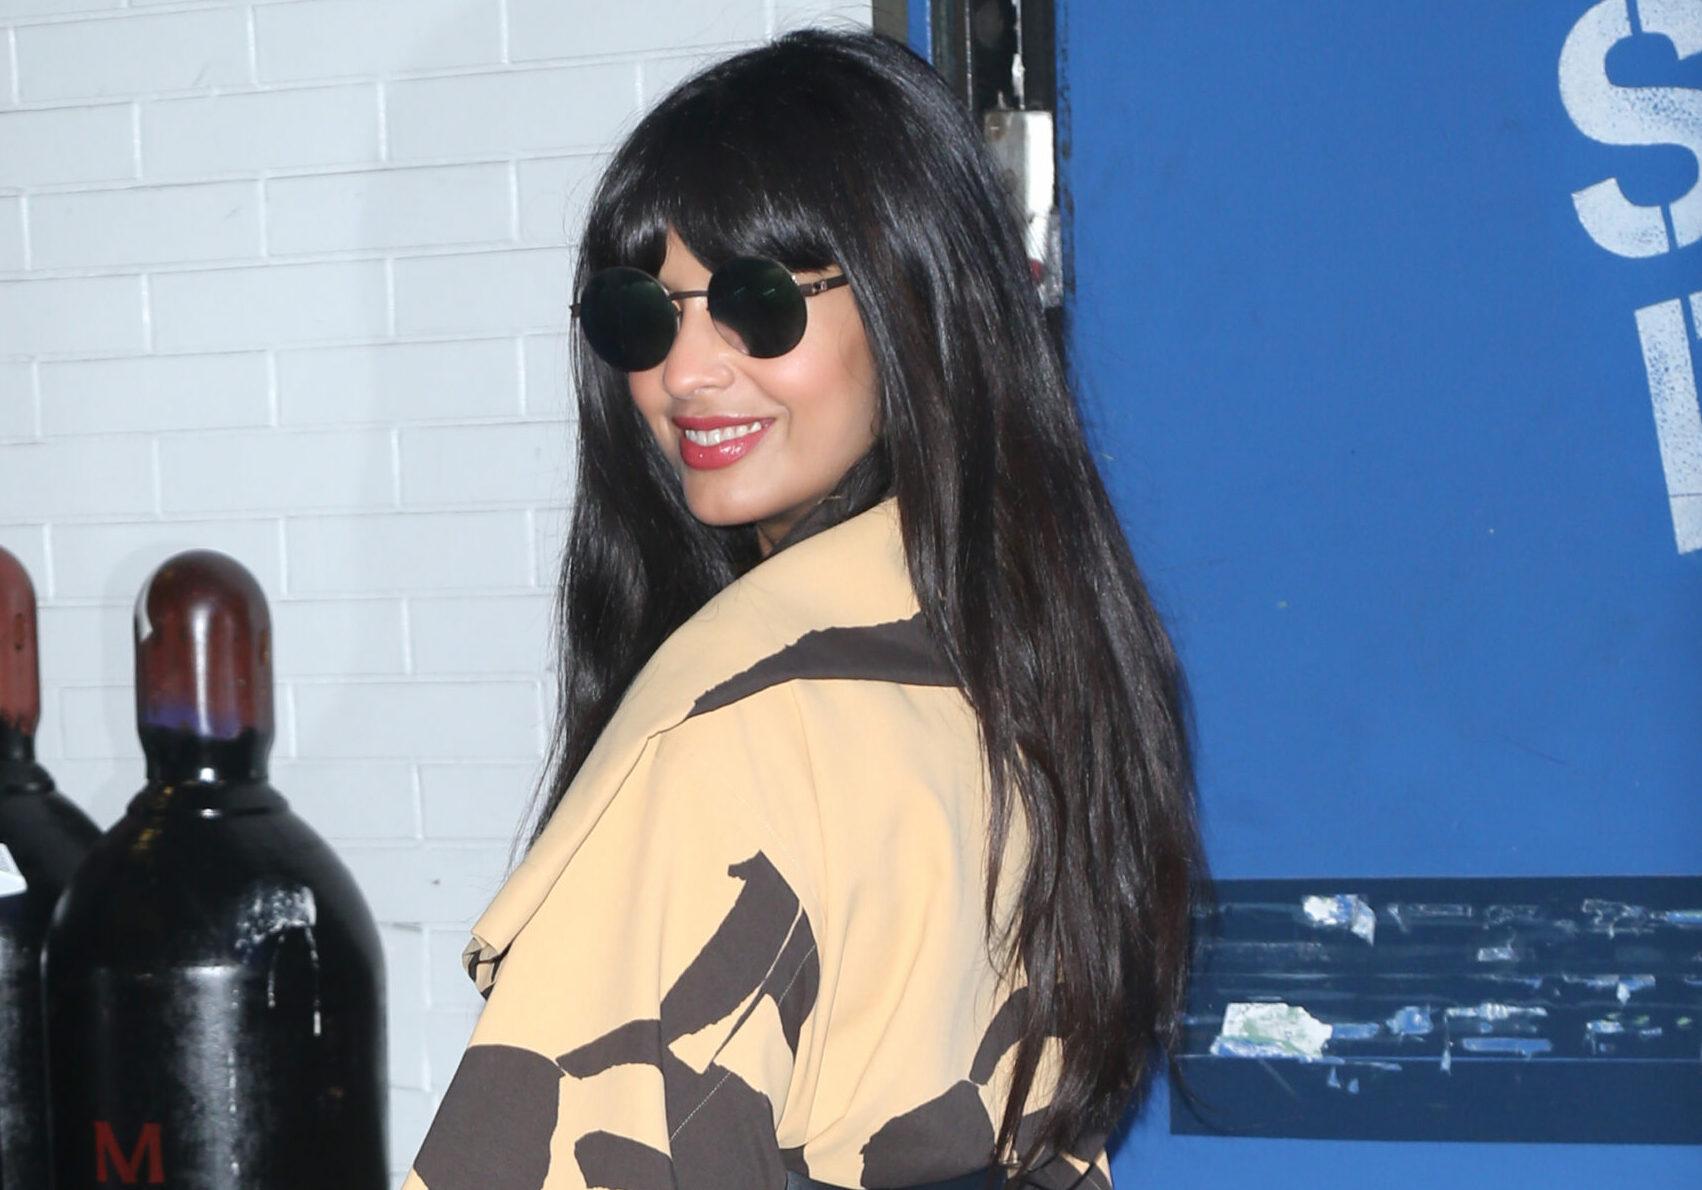 Jameela Jamil out and about in New York City